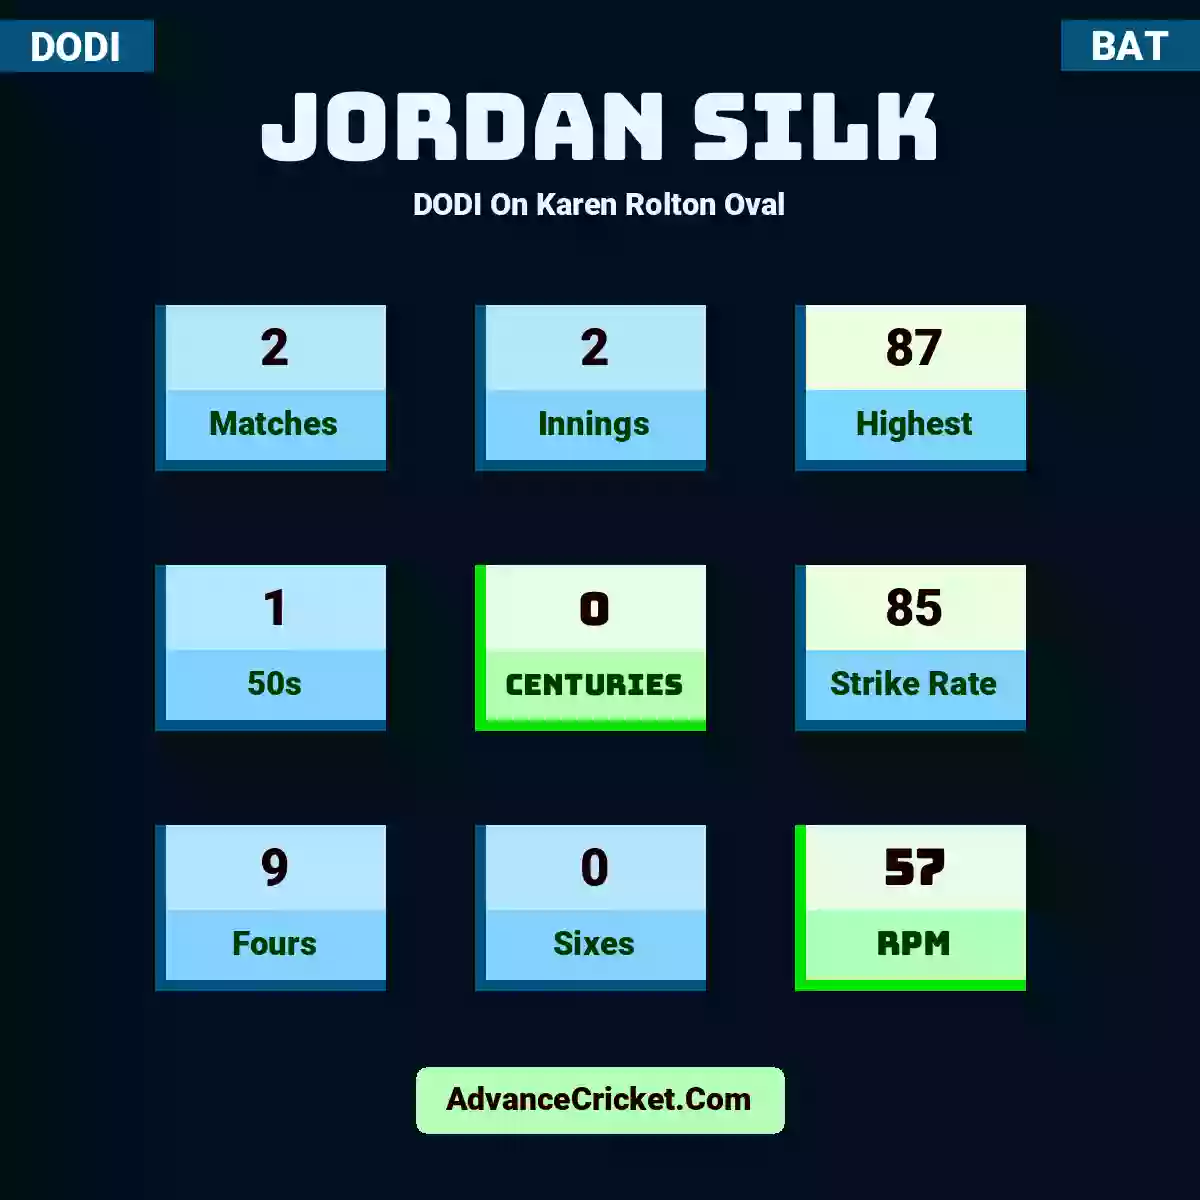 Jordan Silk DODI  On Karen Rolton Oval, Jordan Silk played 2 matches, scored 87 runs as highest, 1 half-centuries, and 0 centuries, with a strike rate of 85. J.Silk hit 9 fours and 0 sixes, with an RPM of 57.